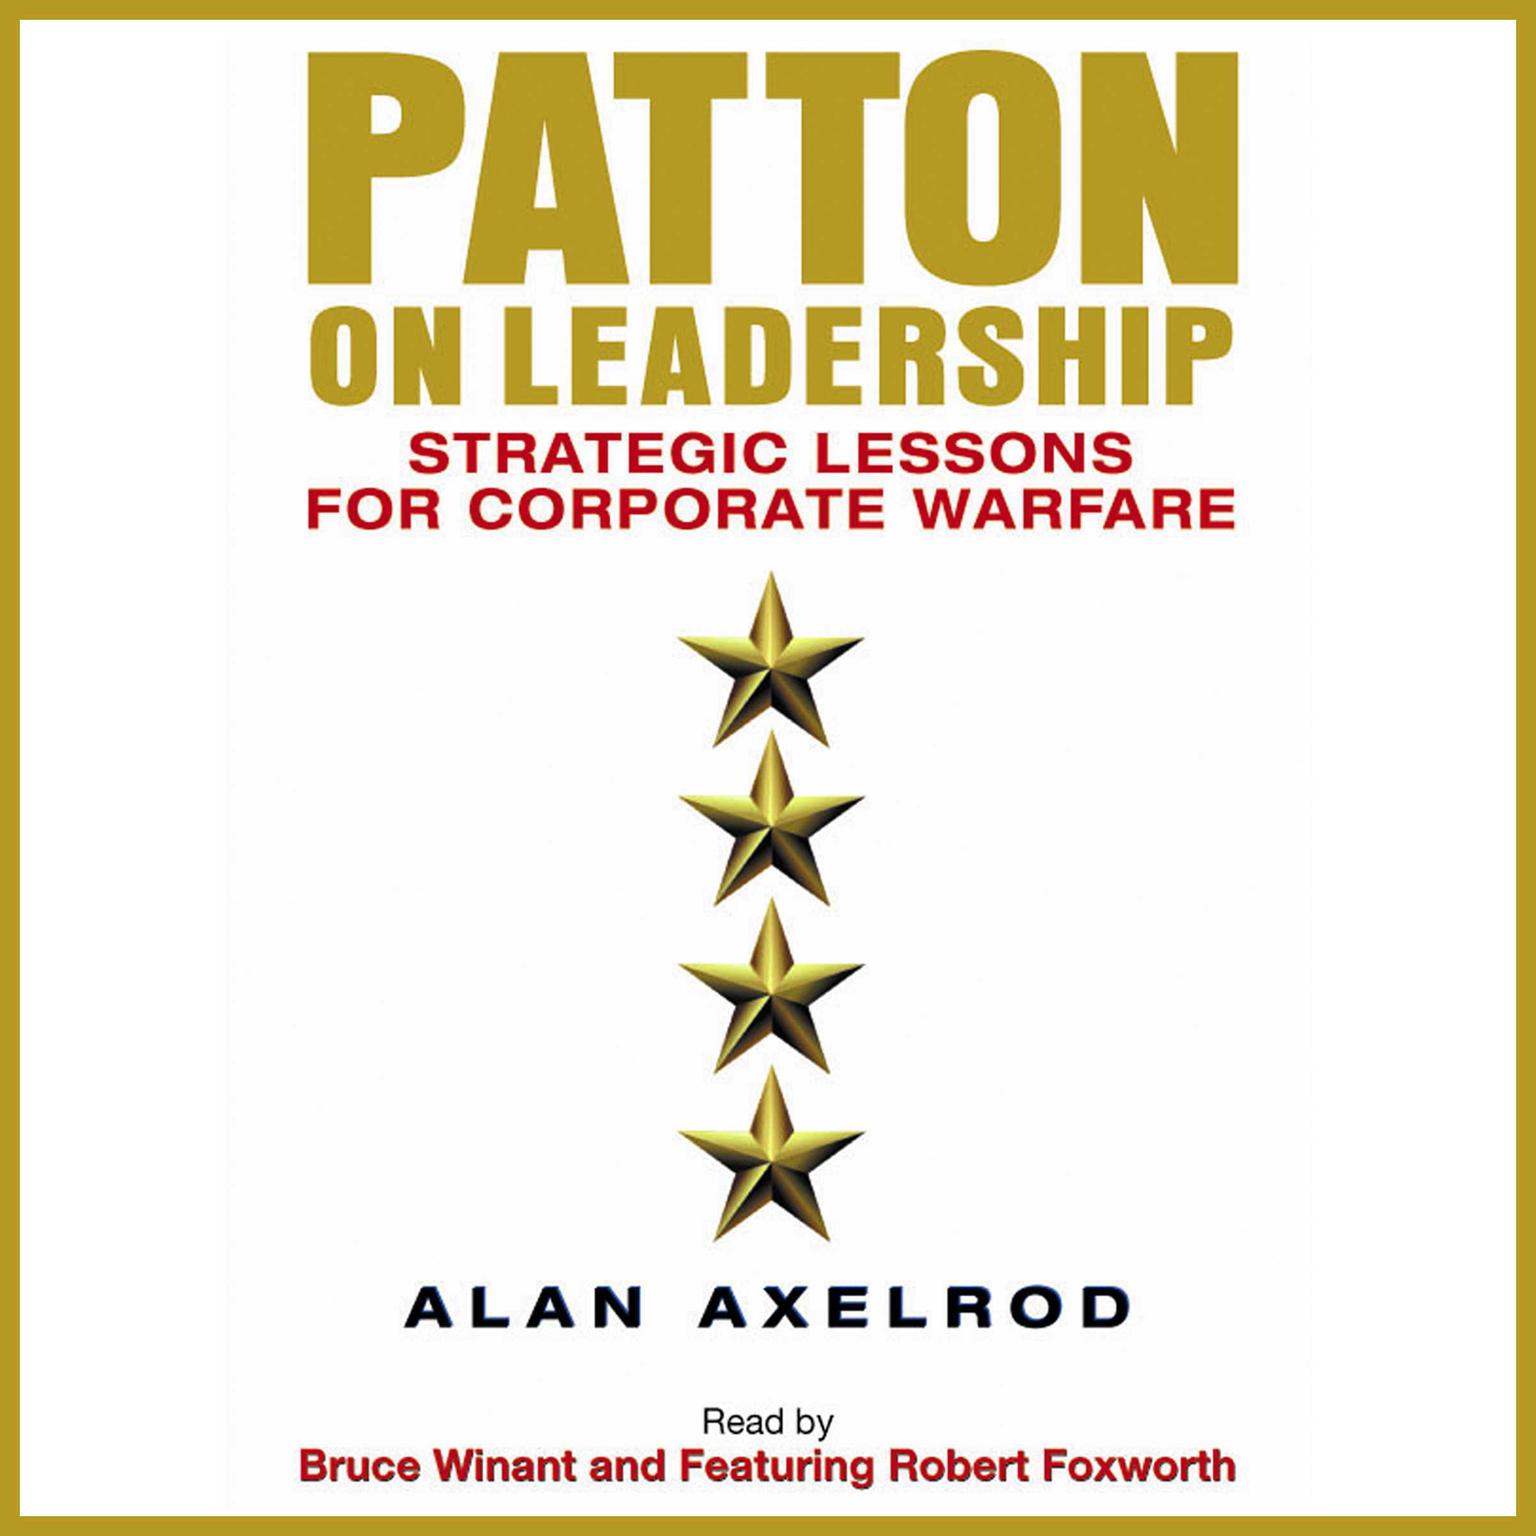 Patton on Leadership (Abridged): Strategic Lessons for Corporate Warfare Audiobook, by Alan Axelrod